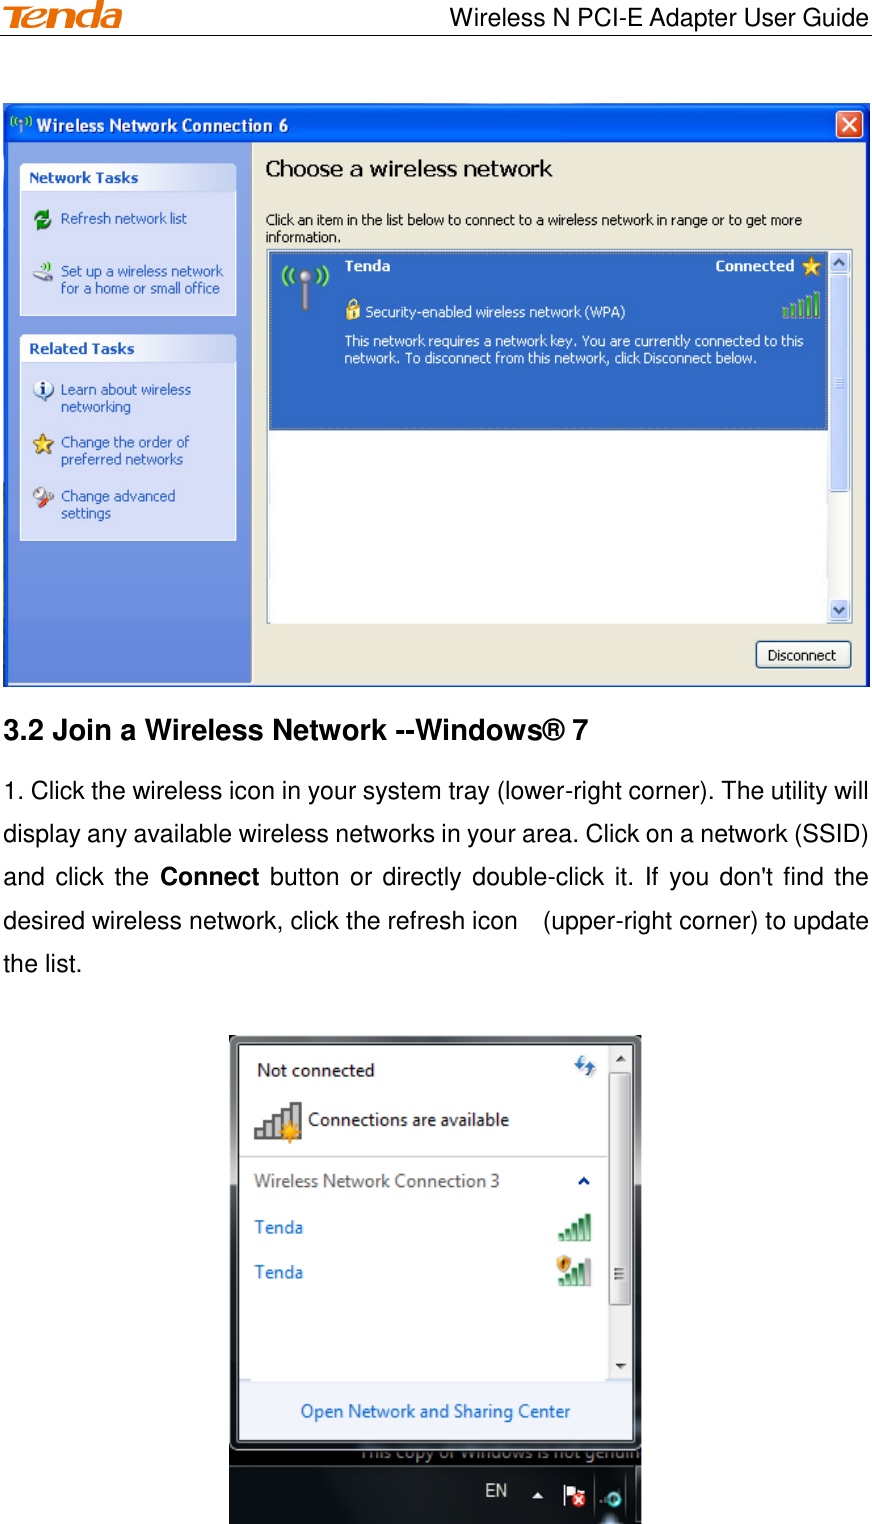                                    Wireless N PCI-E Adapter User Guide  3.2 Join a Wireless Network --Windows® 7 1. Click the wireless icon in your system tray (lower-right corner). The utility will display any available wireless networks in your area. Click on a network (SSID) and click the  Connect button or directly  double-click it. If you don&apos;t find the desired wireless network, click the refresh icon    (upper-right corner) to update the list.   